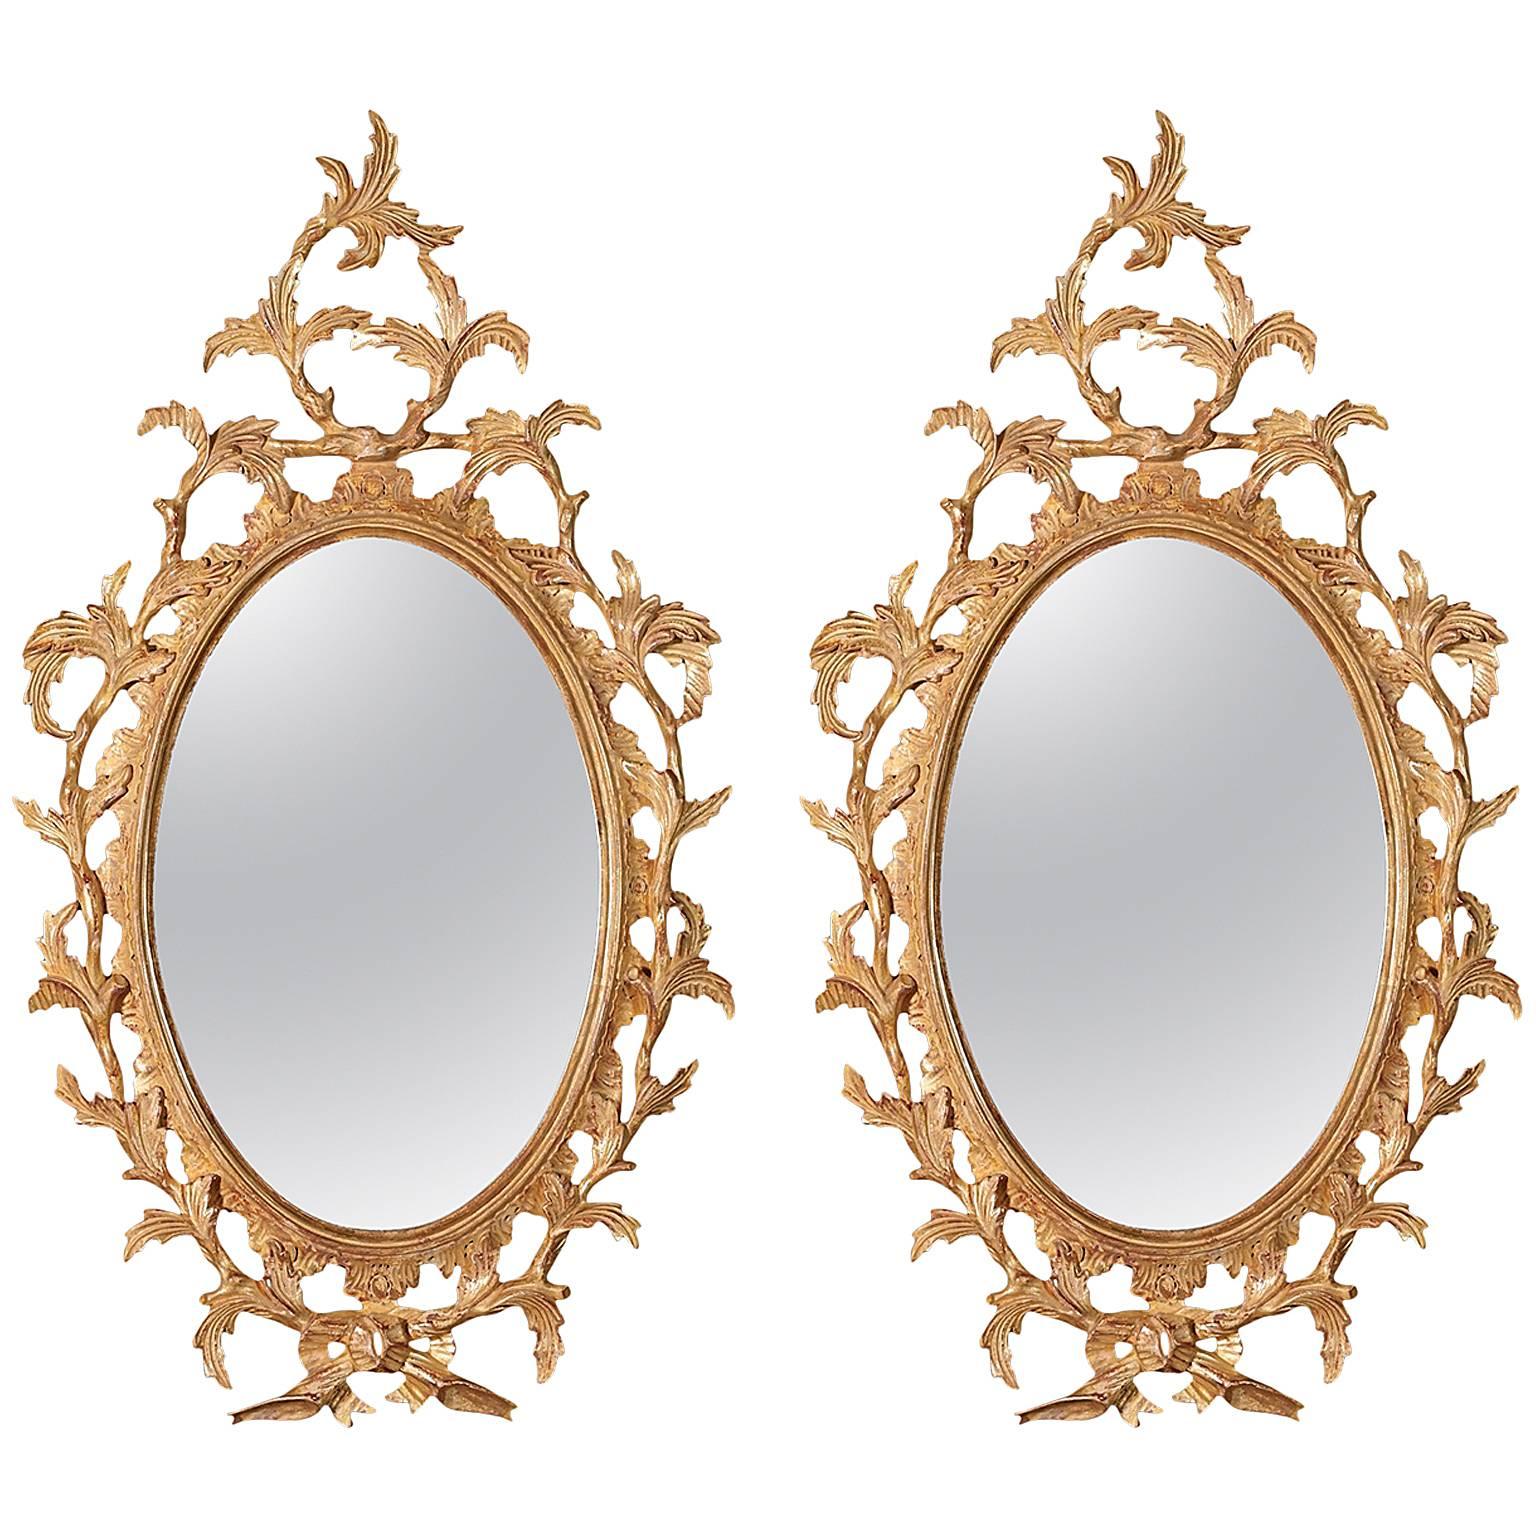 Pair of Small Chippendale Oval Mirrors in the manner of Thomas Chippendale